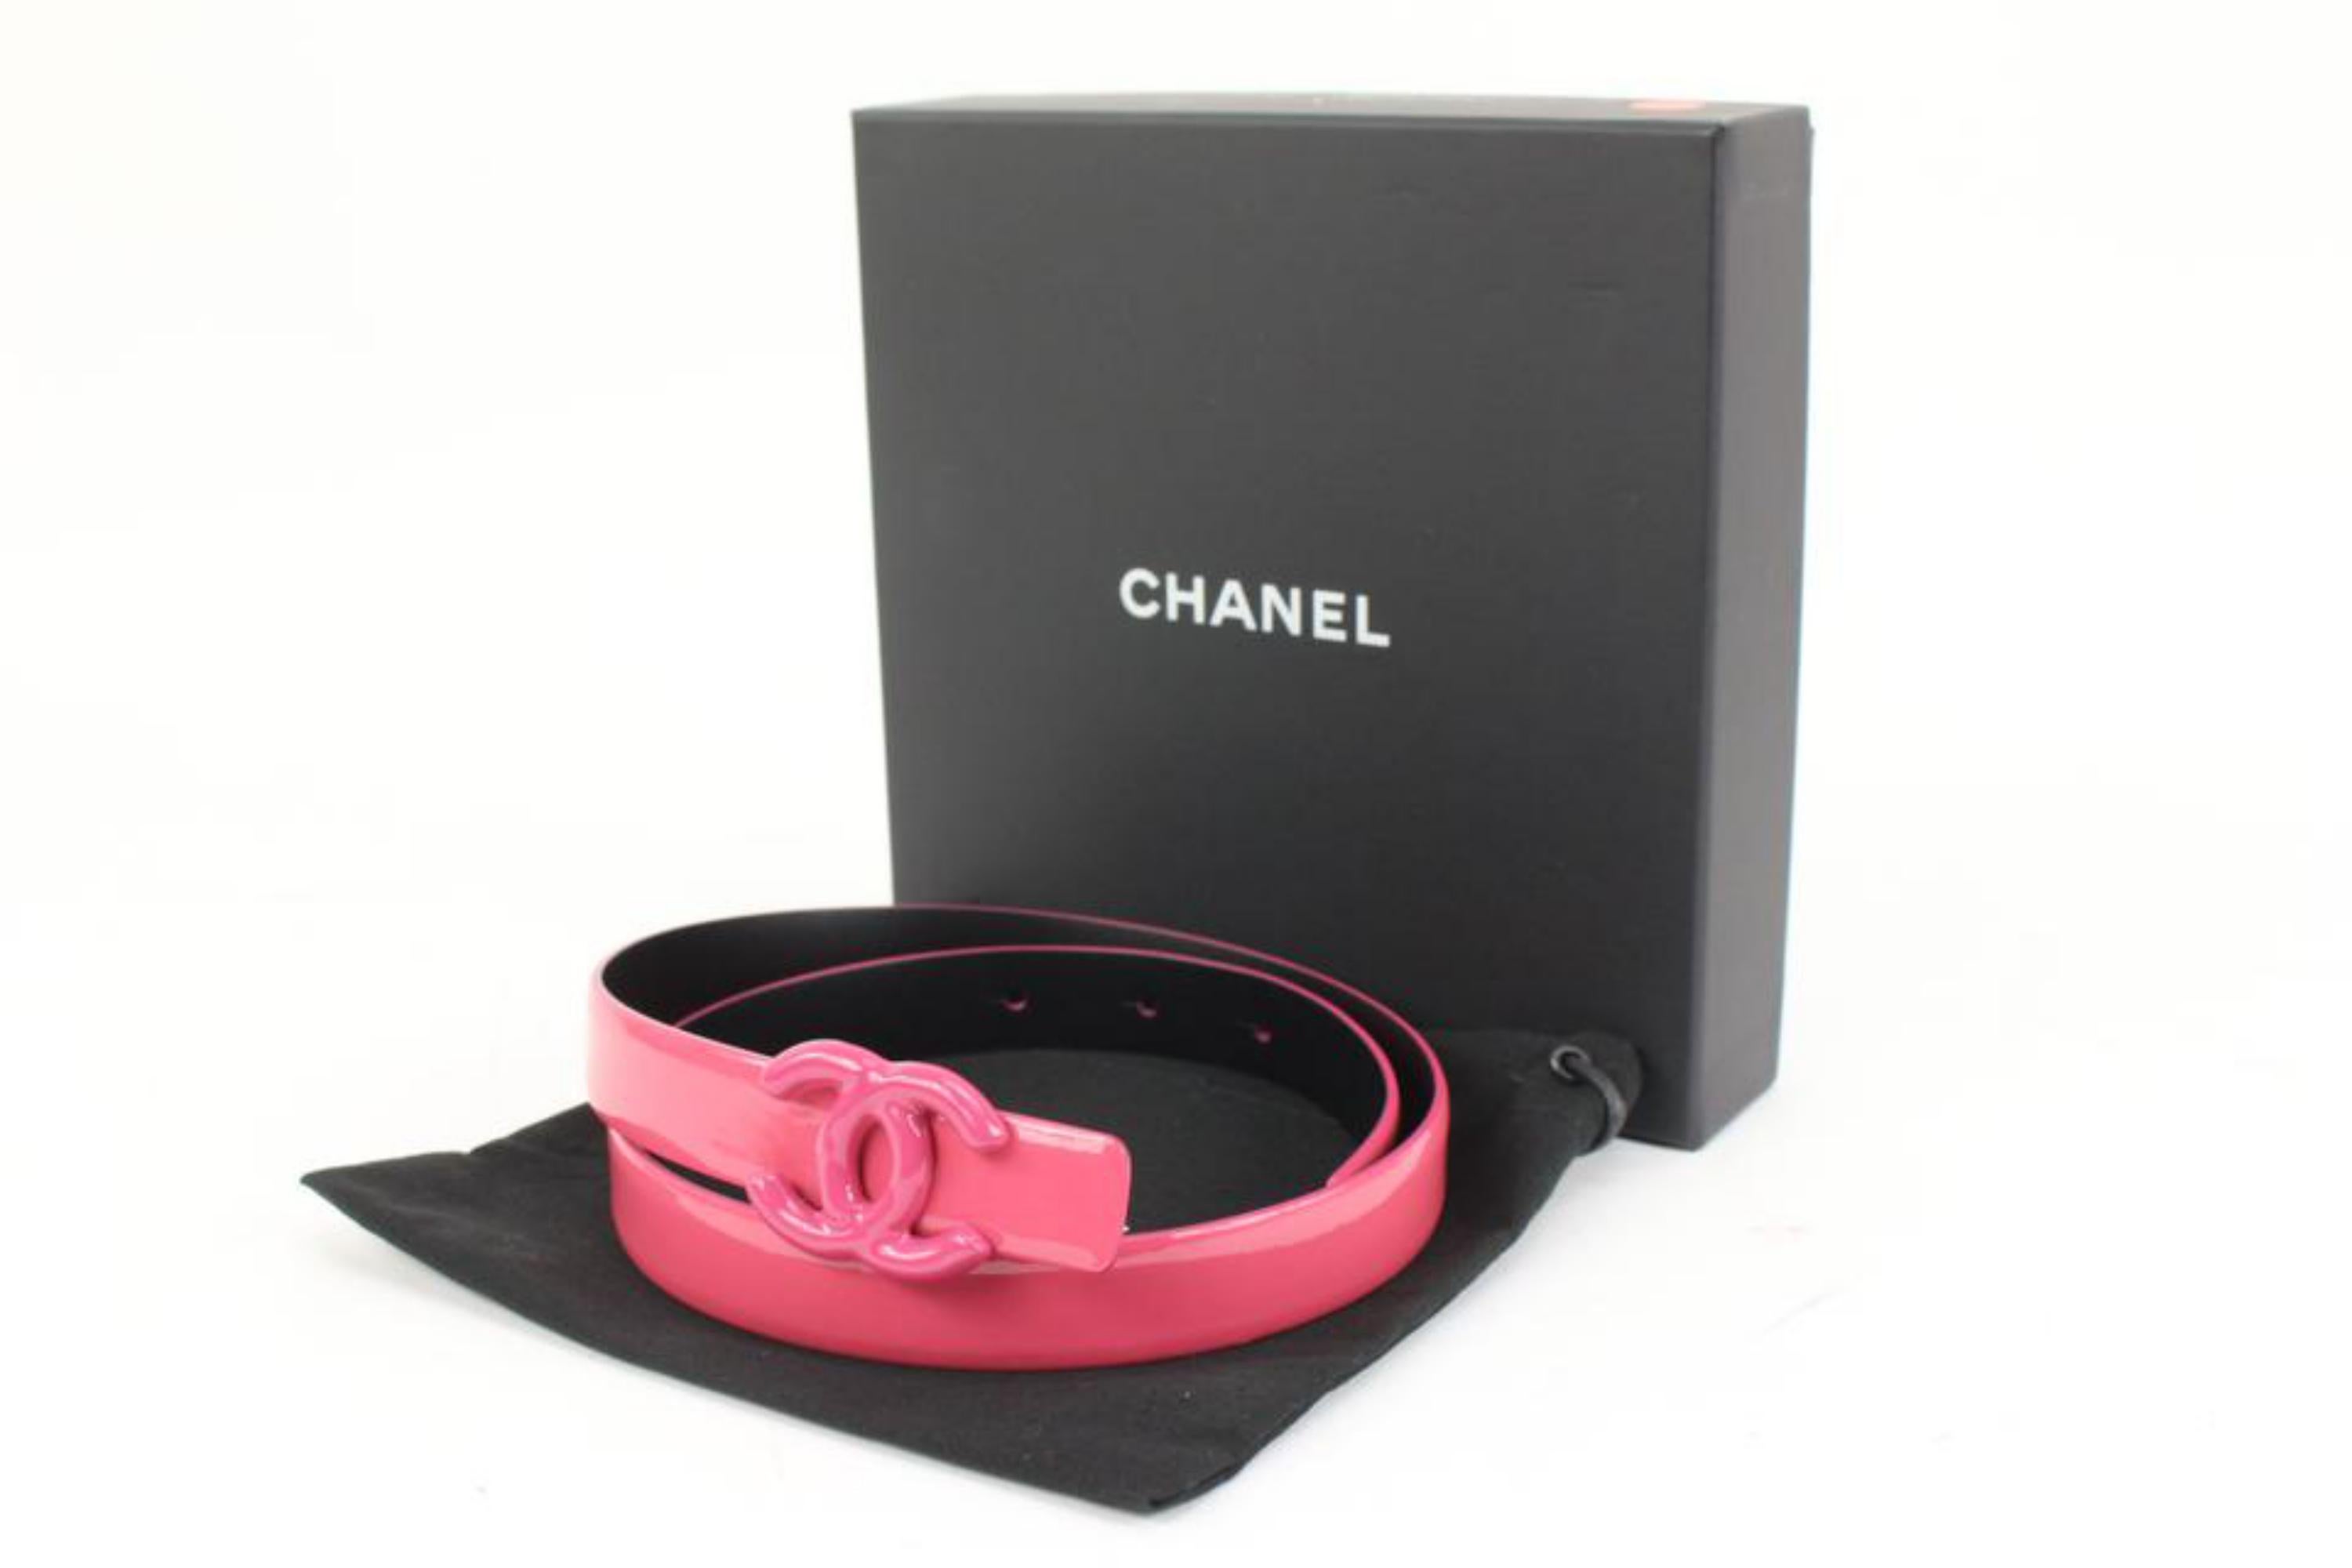 Chanel B 15P Hot Bubble Gum Pink Leather CC Belt 4ck318s
Date Code/Serial Number: B15 P
Made In: Italy
Measurements: Length:  31.5